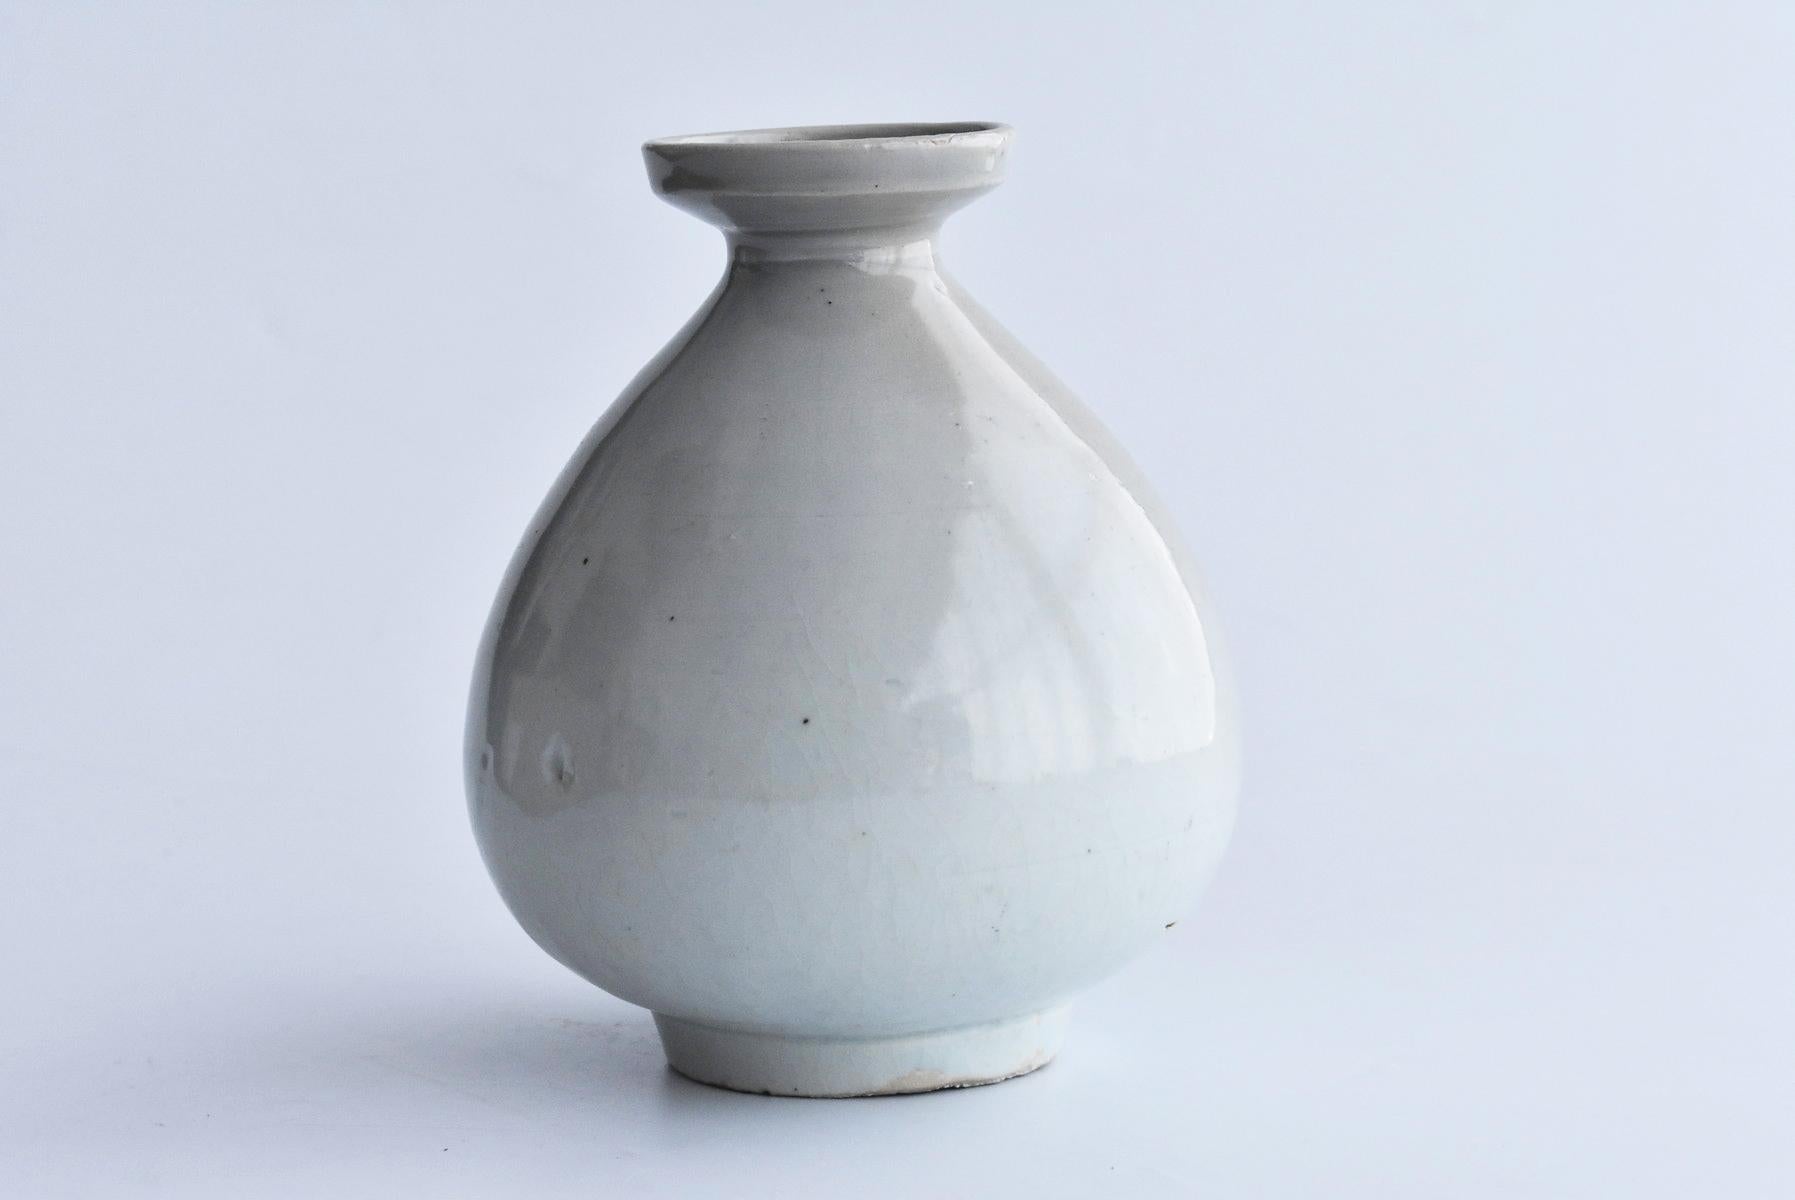 This is a Korean vase from the 18th century.

During the Joseon dynasty in Korea, white pottery was considered a noble one.
Many masterpieces are white.

And this is a pottery from the late Joseon dynasty.
It is from the 18th century.
The